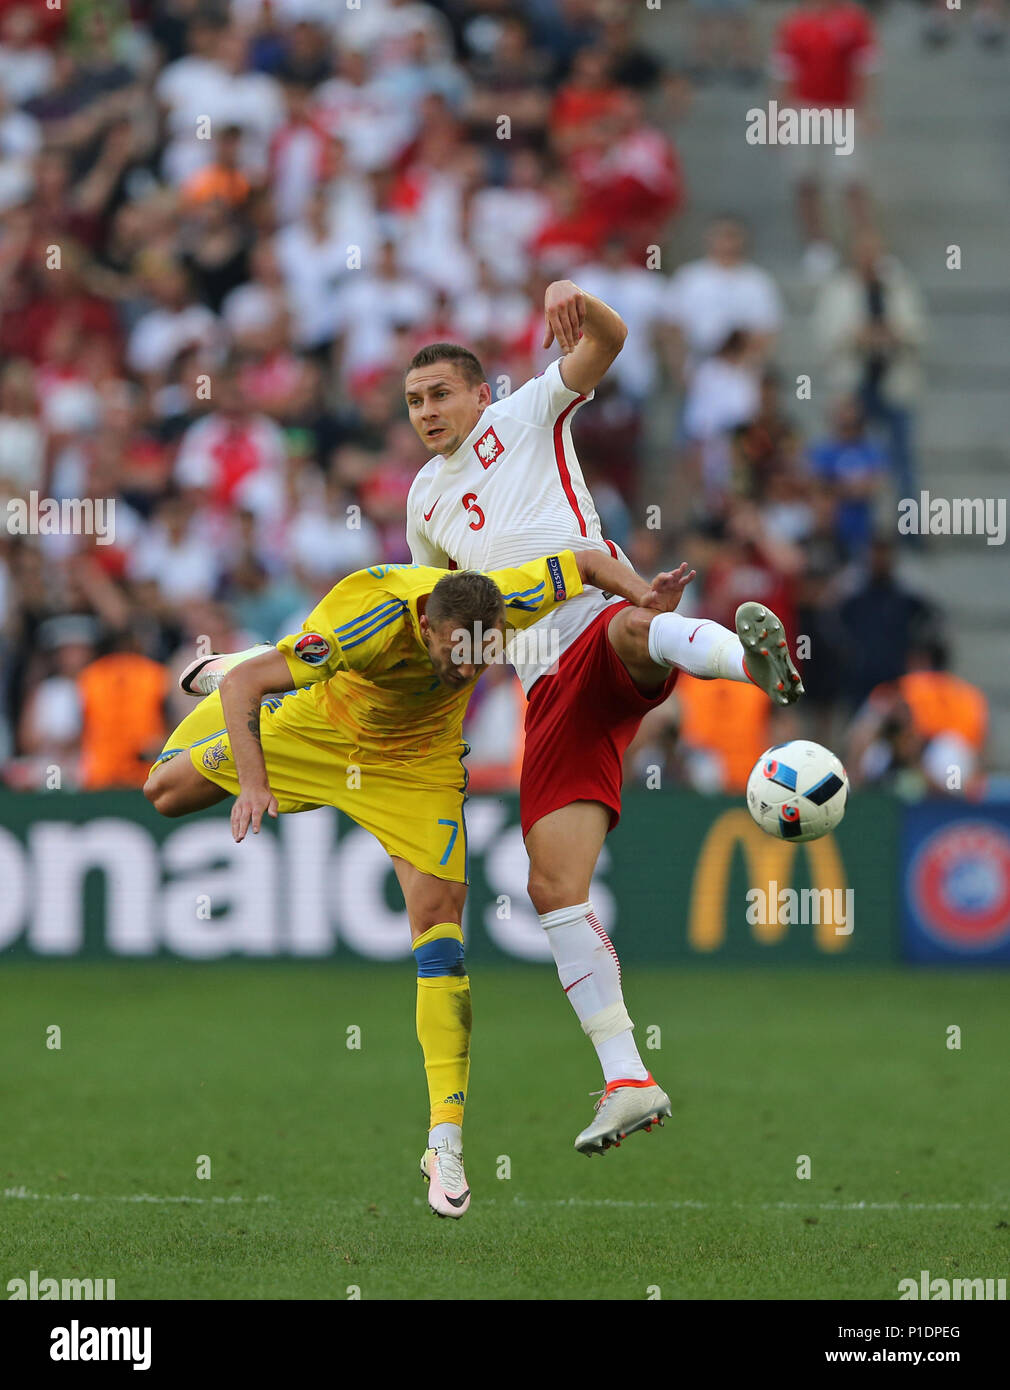 MARSEILLE, FRANCE - JUNE 21, 2016: Andriy Yarmolenko of Ukraine (L) and Artur Jedrzejczyk of Poland in action during their UEFA EURO 2016 game at Stad Stock Photo